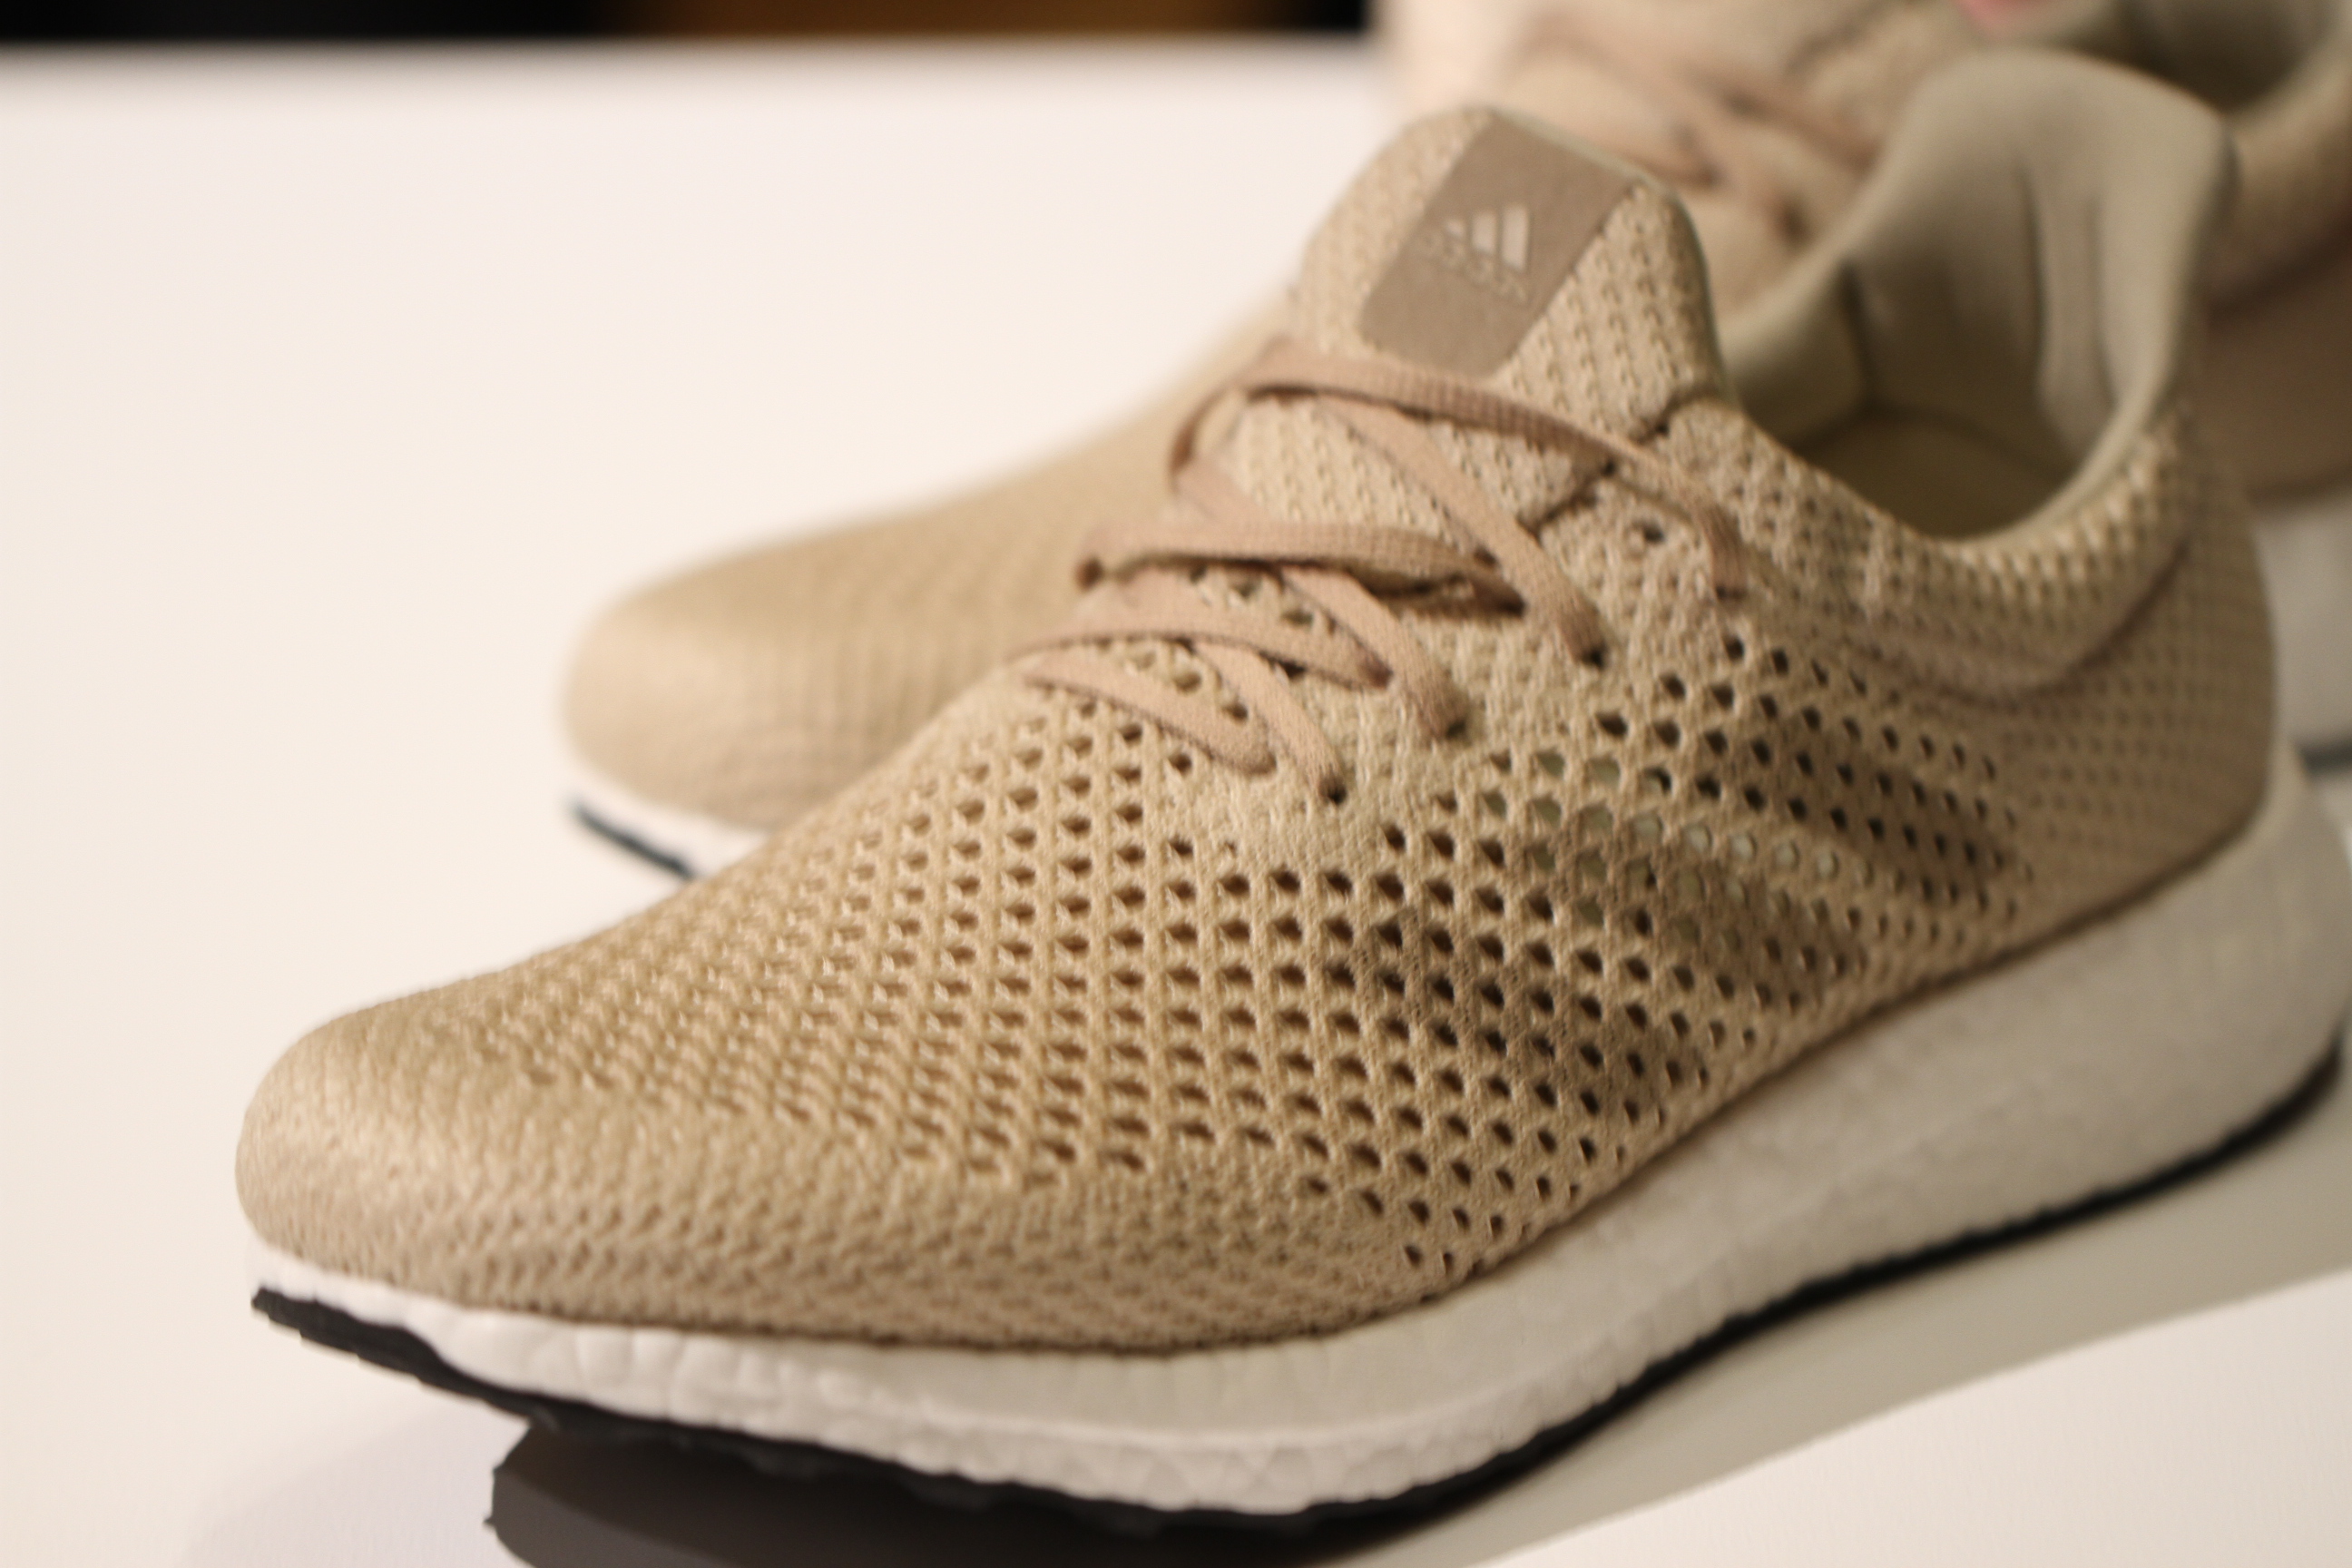 These Adidas shoes are biodegradable 